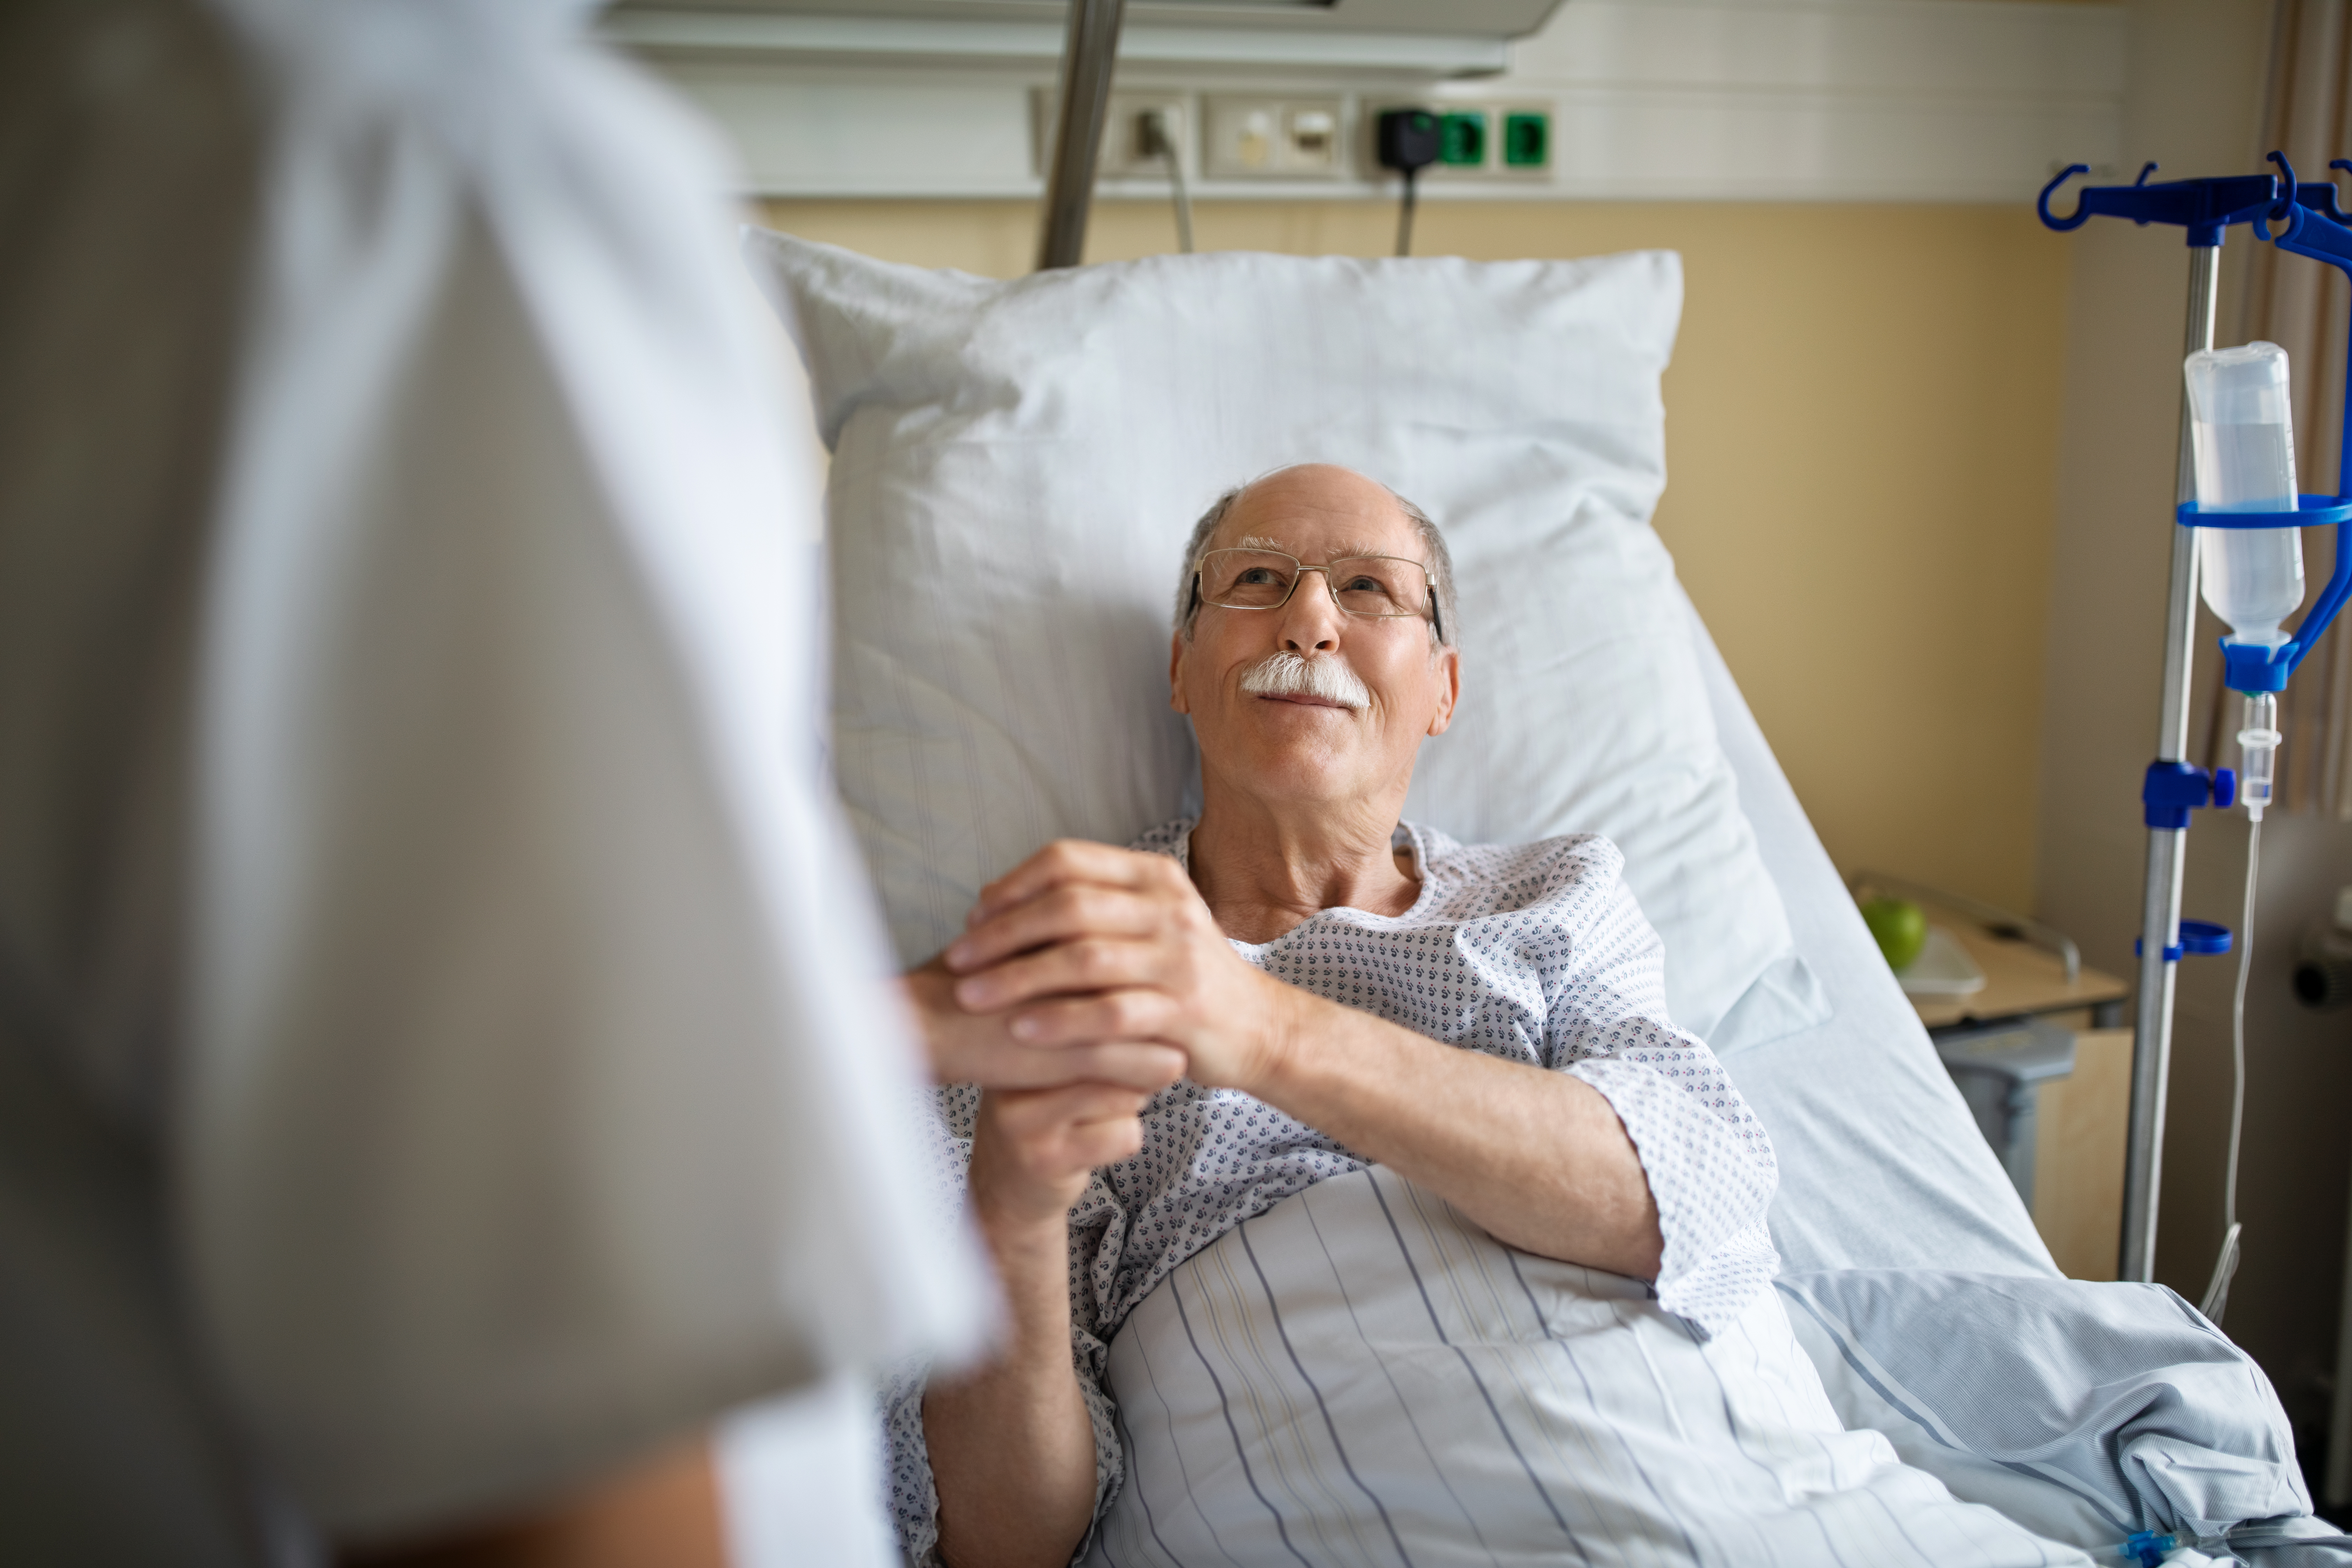 Senior man holding hand of female nurse in hospital room | Source: Getty Images